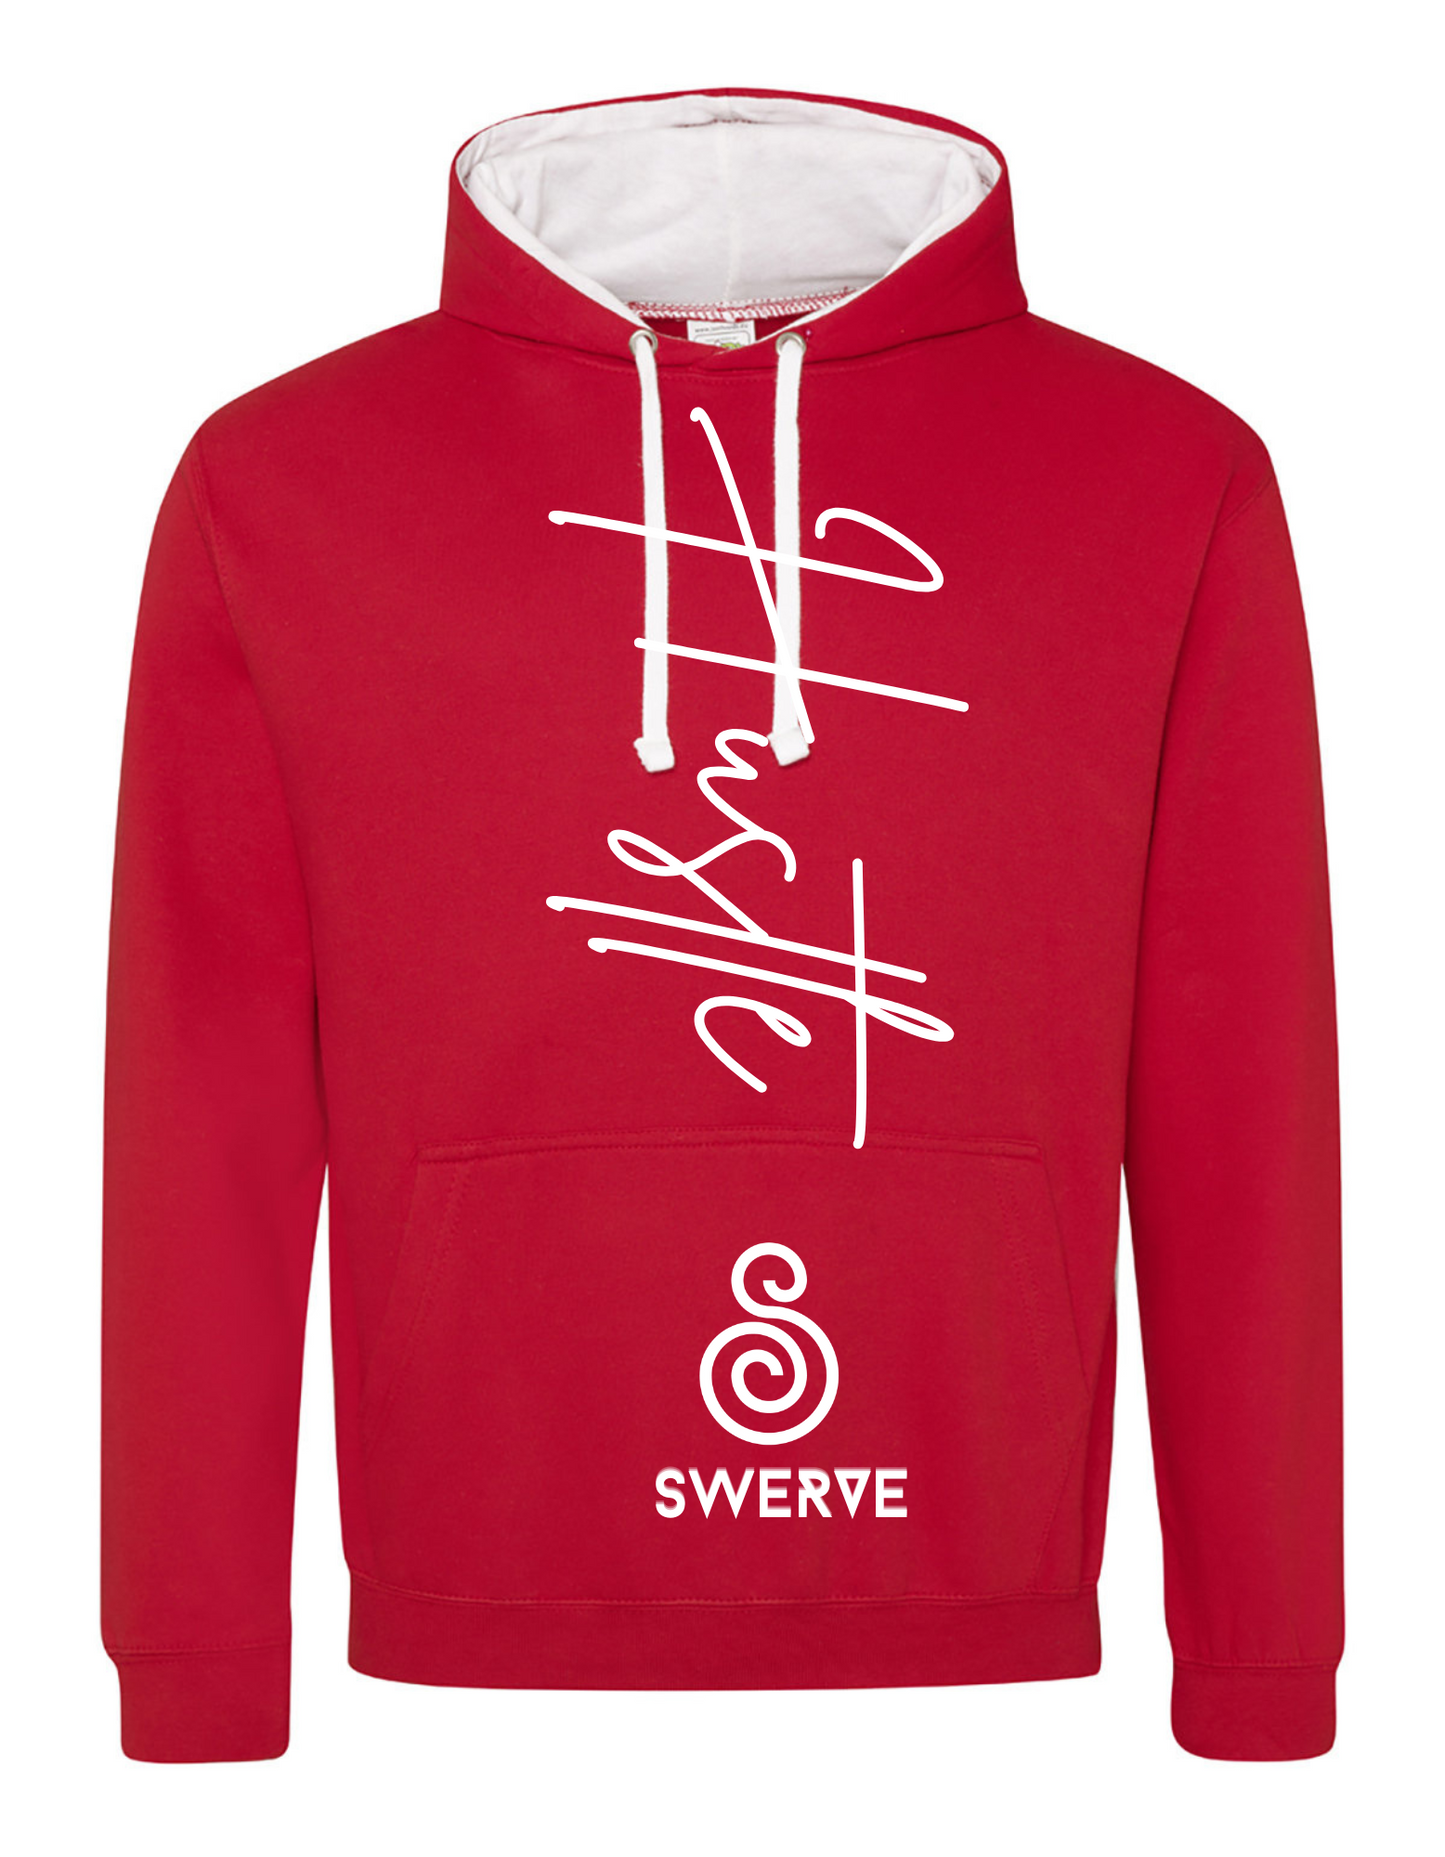 Stay Ahead of the Game: The Hustle and Swerve Hoodie